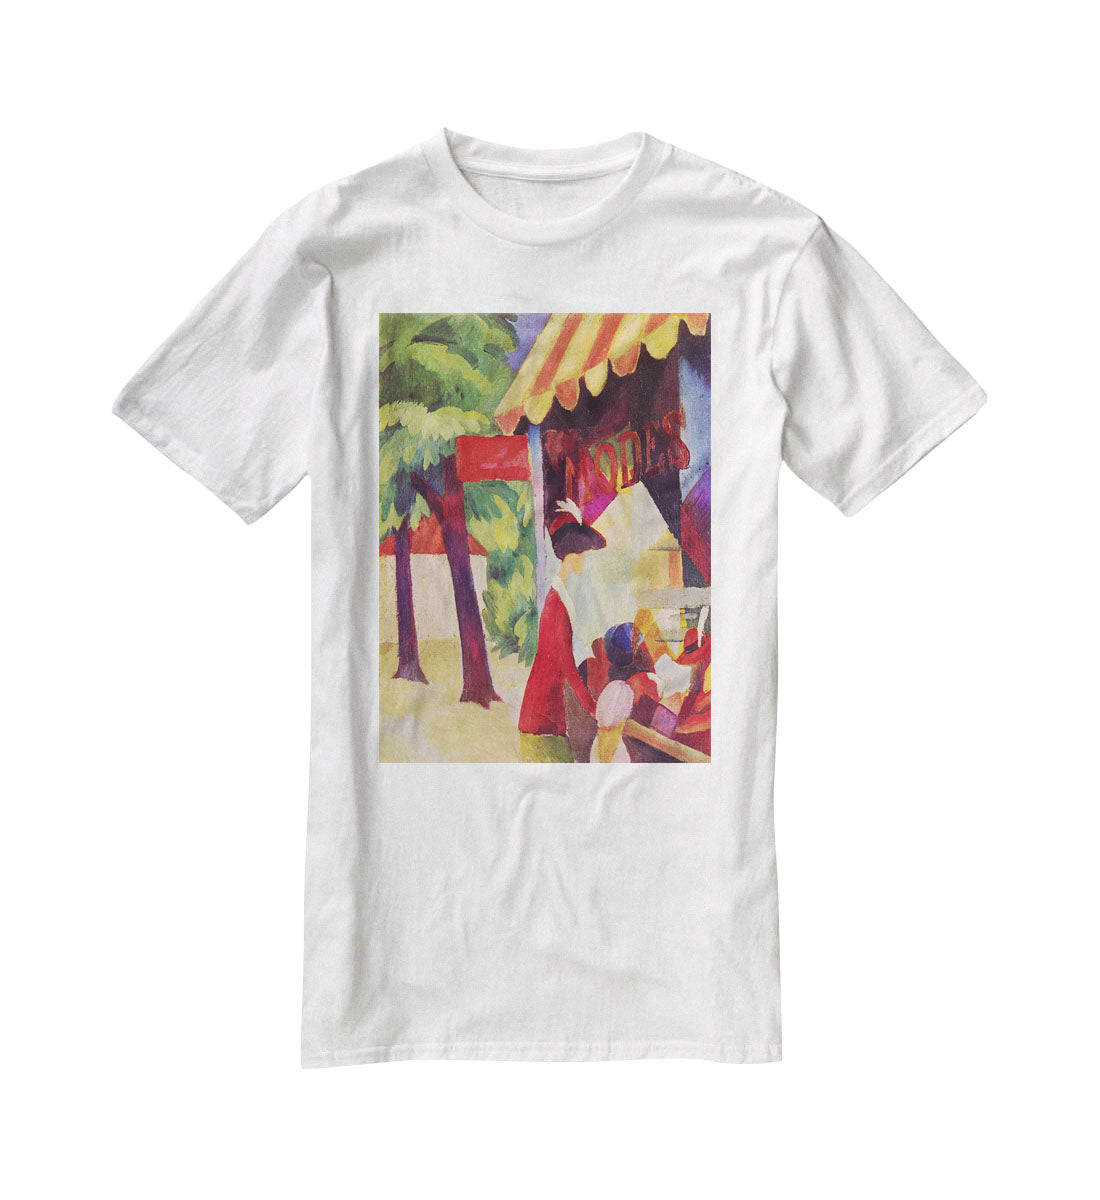 Before Hutladen woman with a red jacket and child by Macke T-Shirt - Canvas Art Rocks - 5